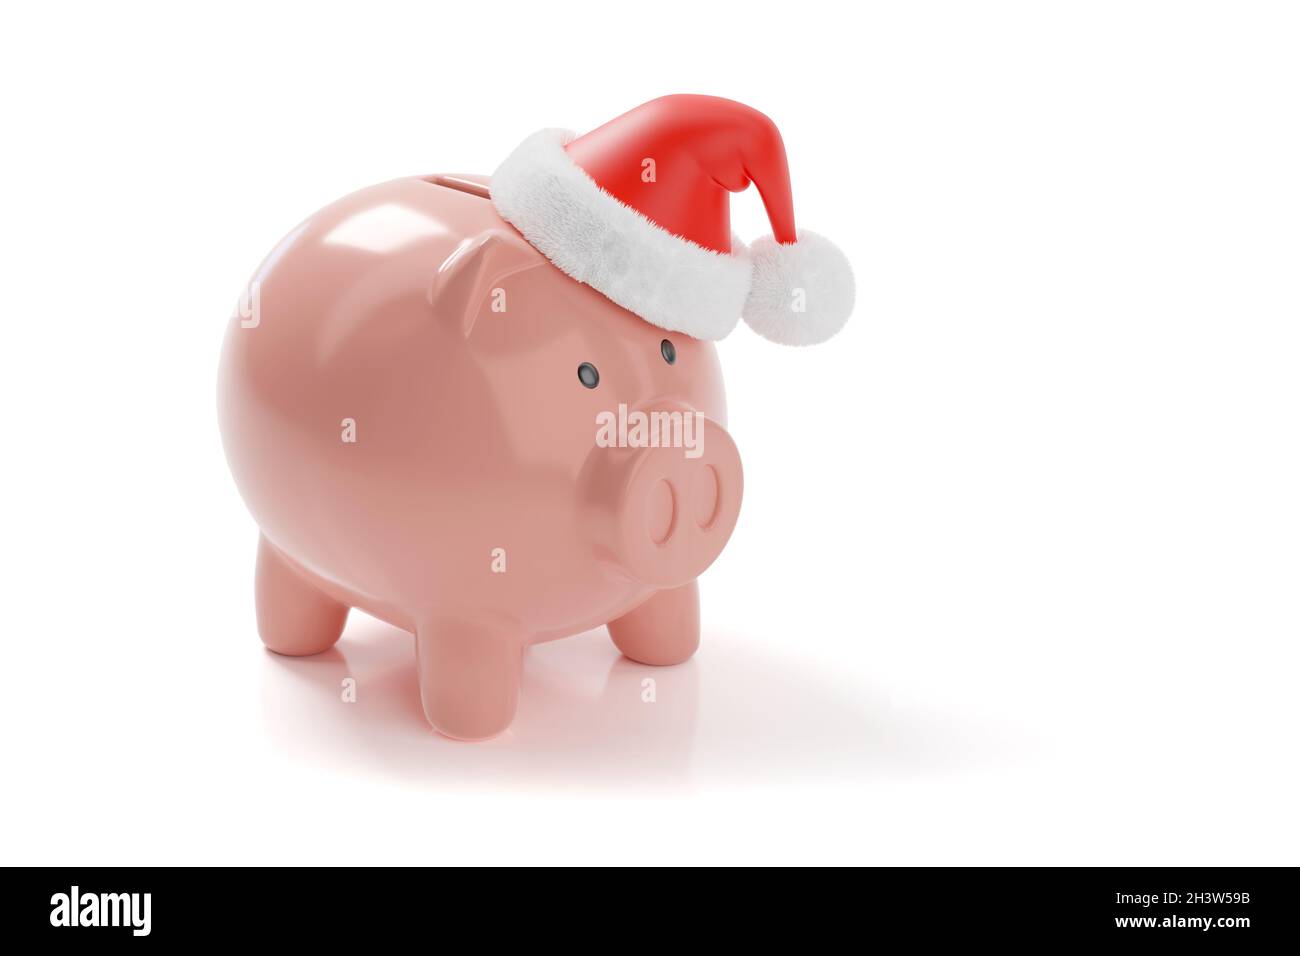 Piggy bank with Santa Claus cap isolated on white background. Christmas concept. 3d illustration. Stock Photo